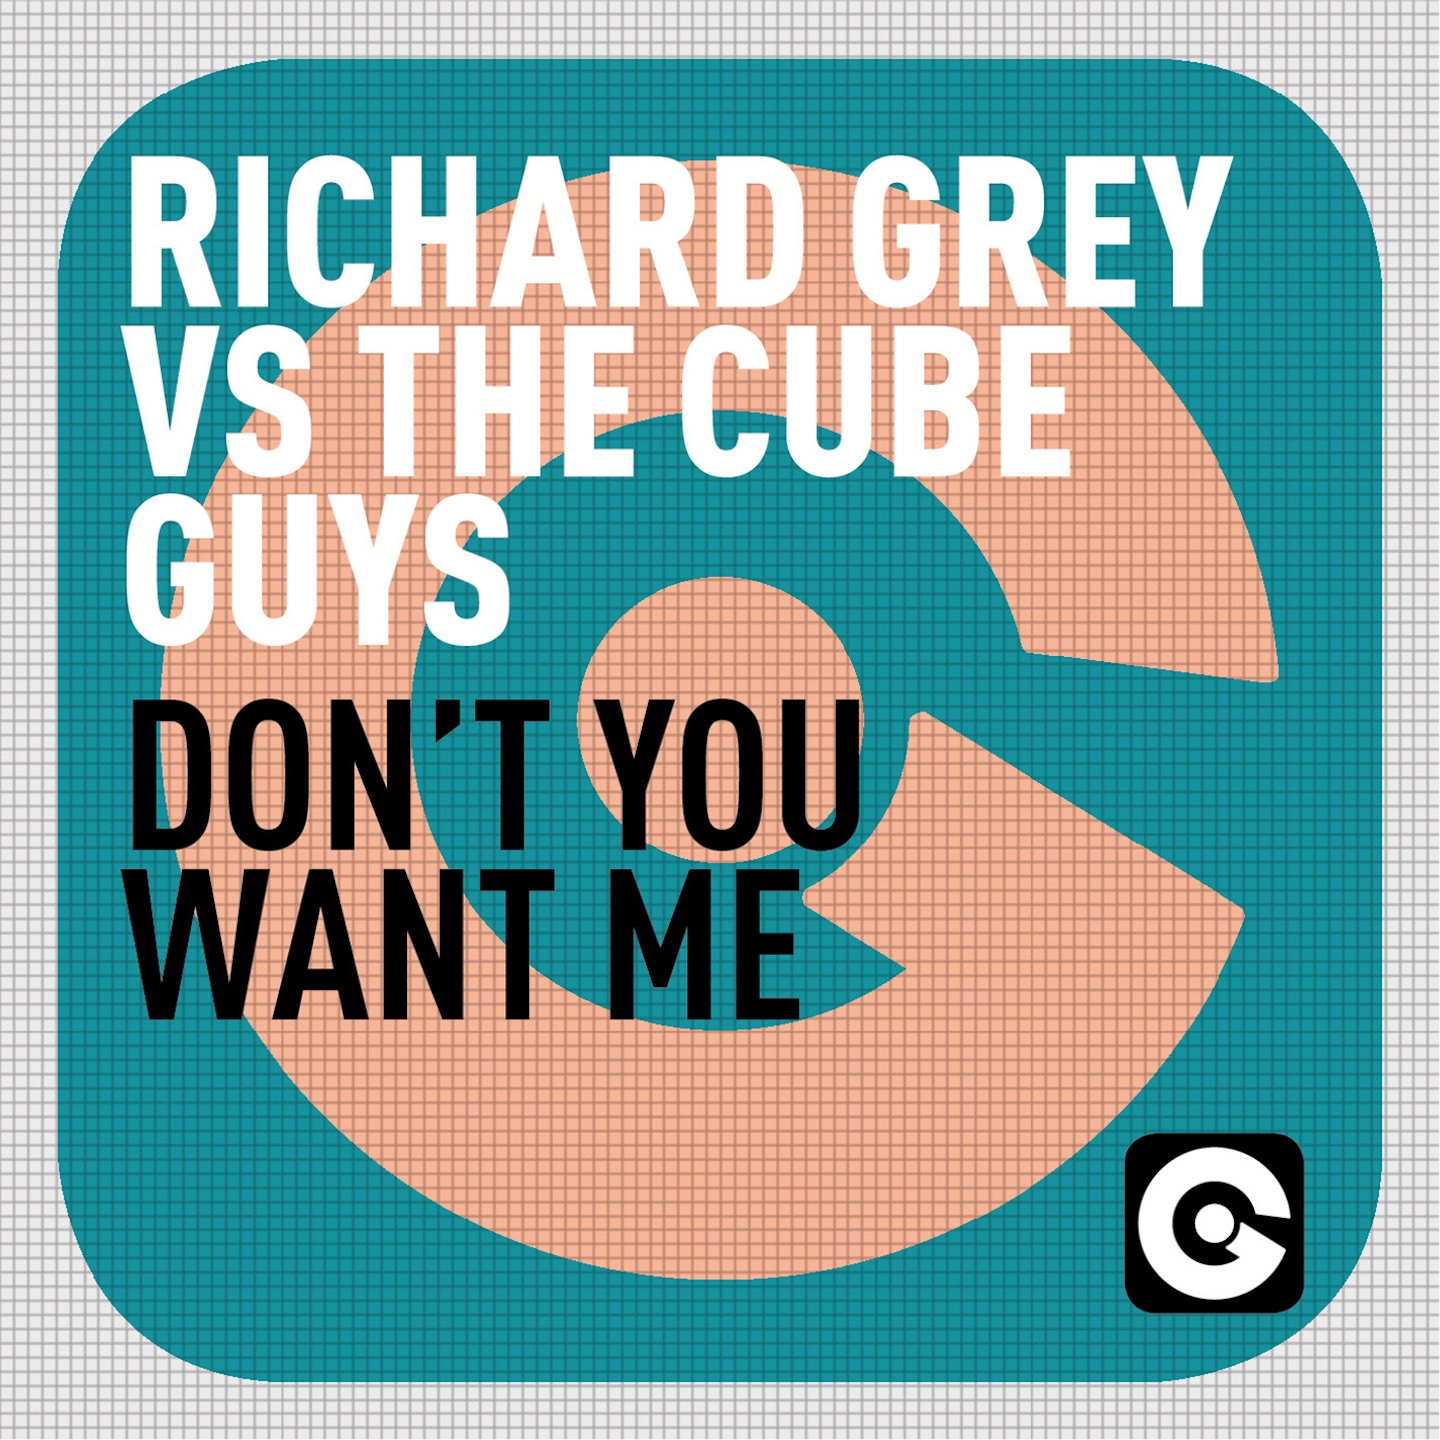 Don't You Want Me (The Cube Guys Edit)